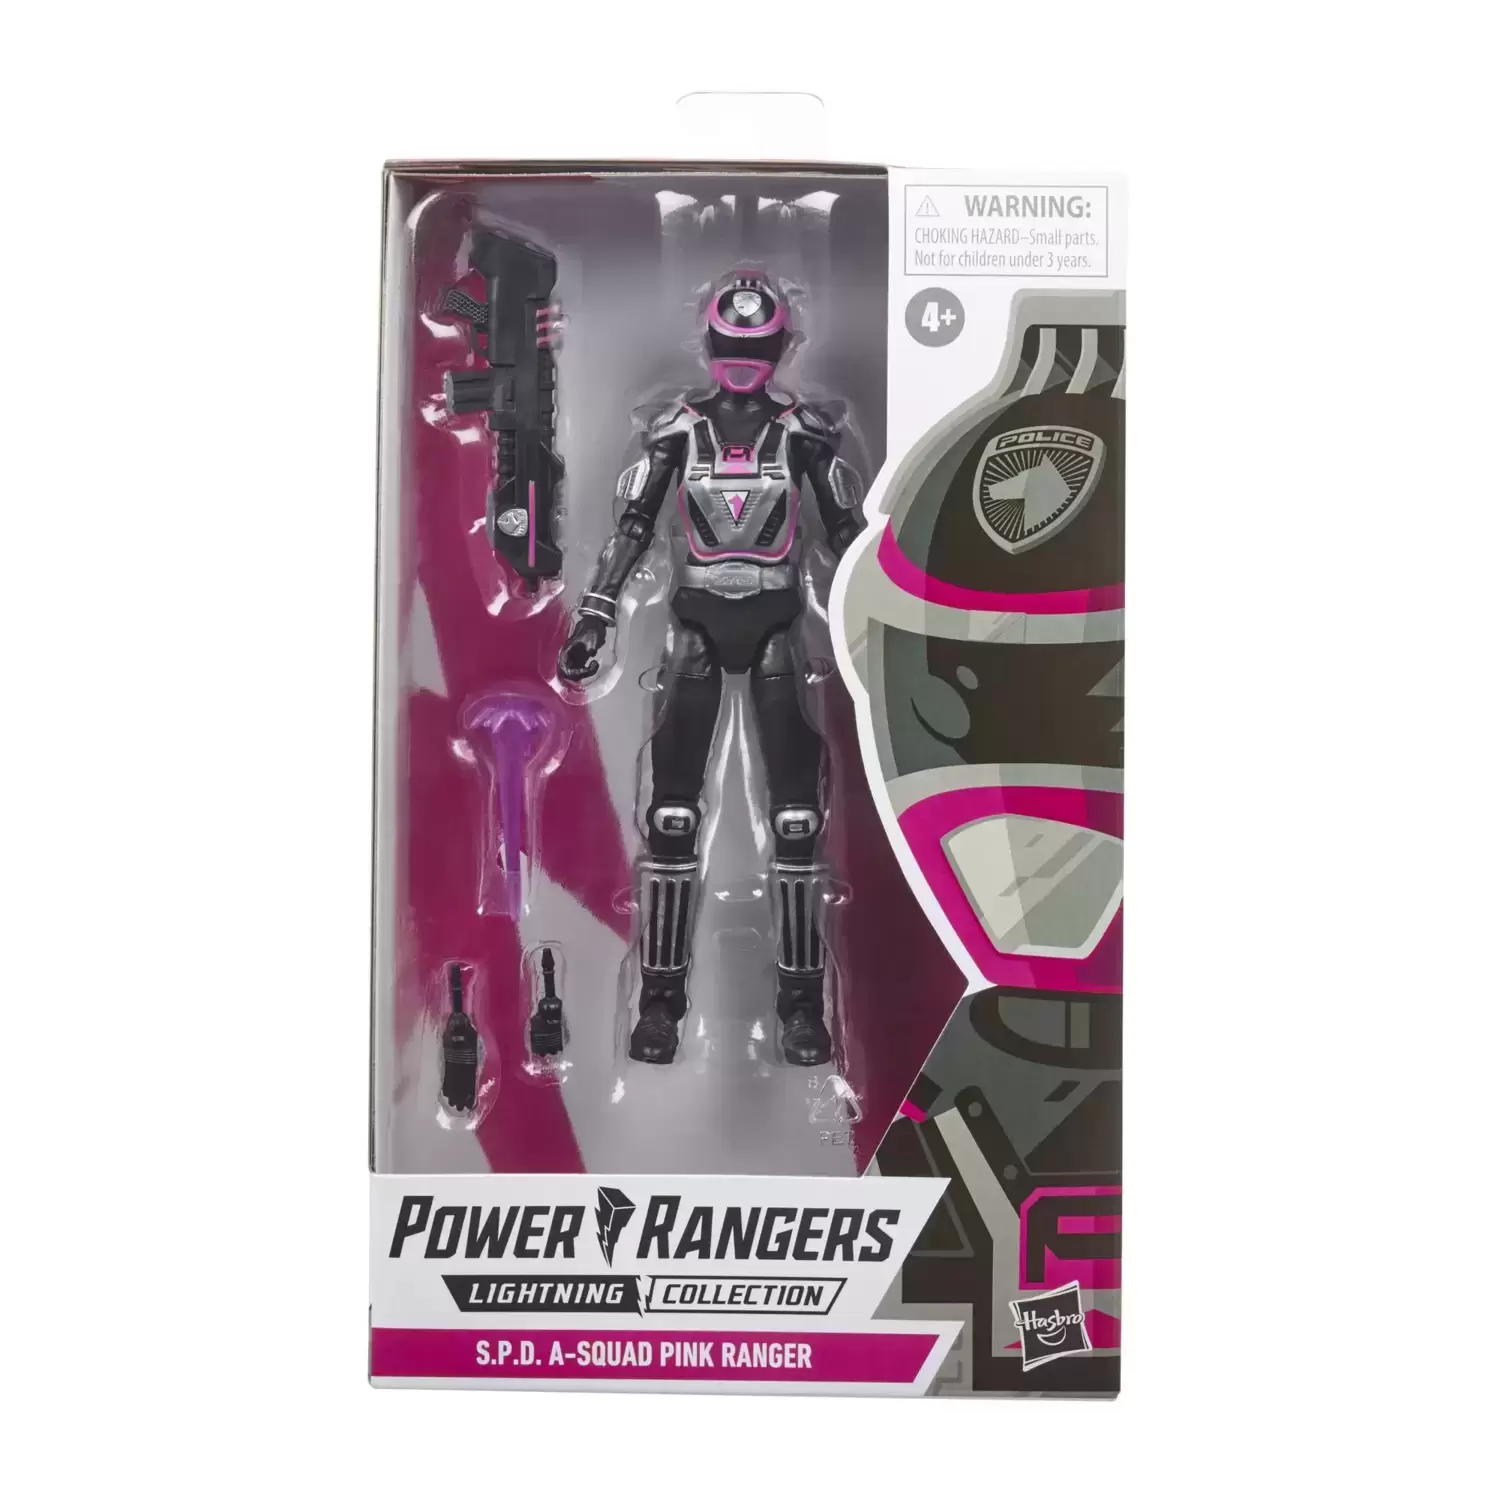 Power Rangers Hasbro - Lightning Collection - S.P.D. A-Squad Pink Ranger